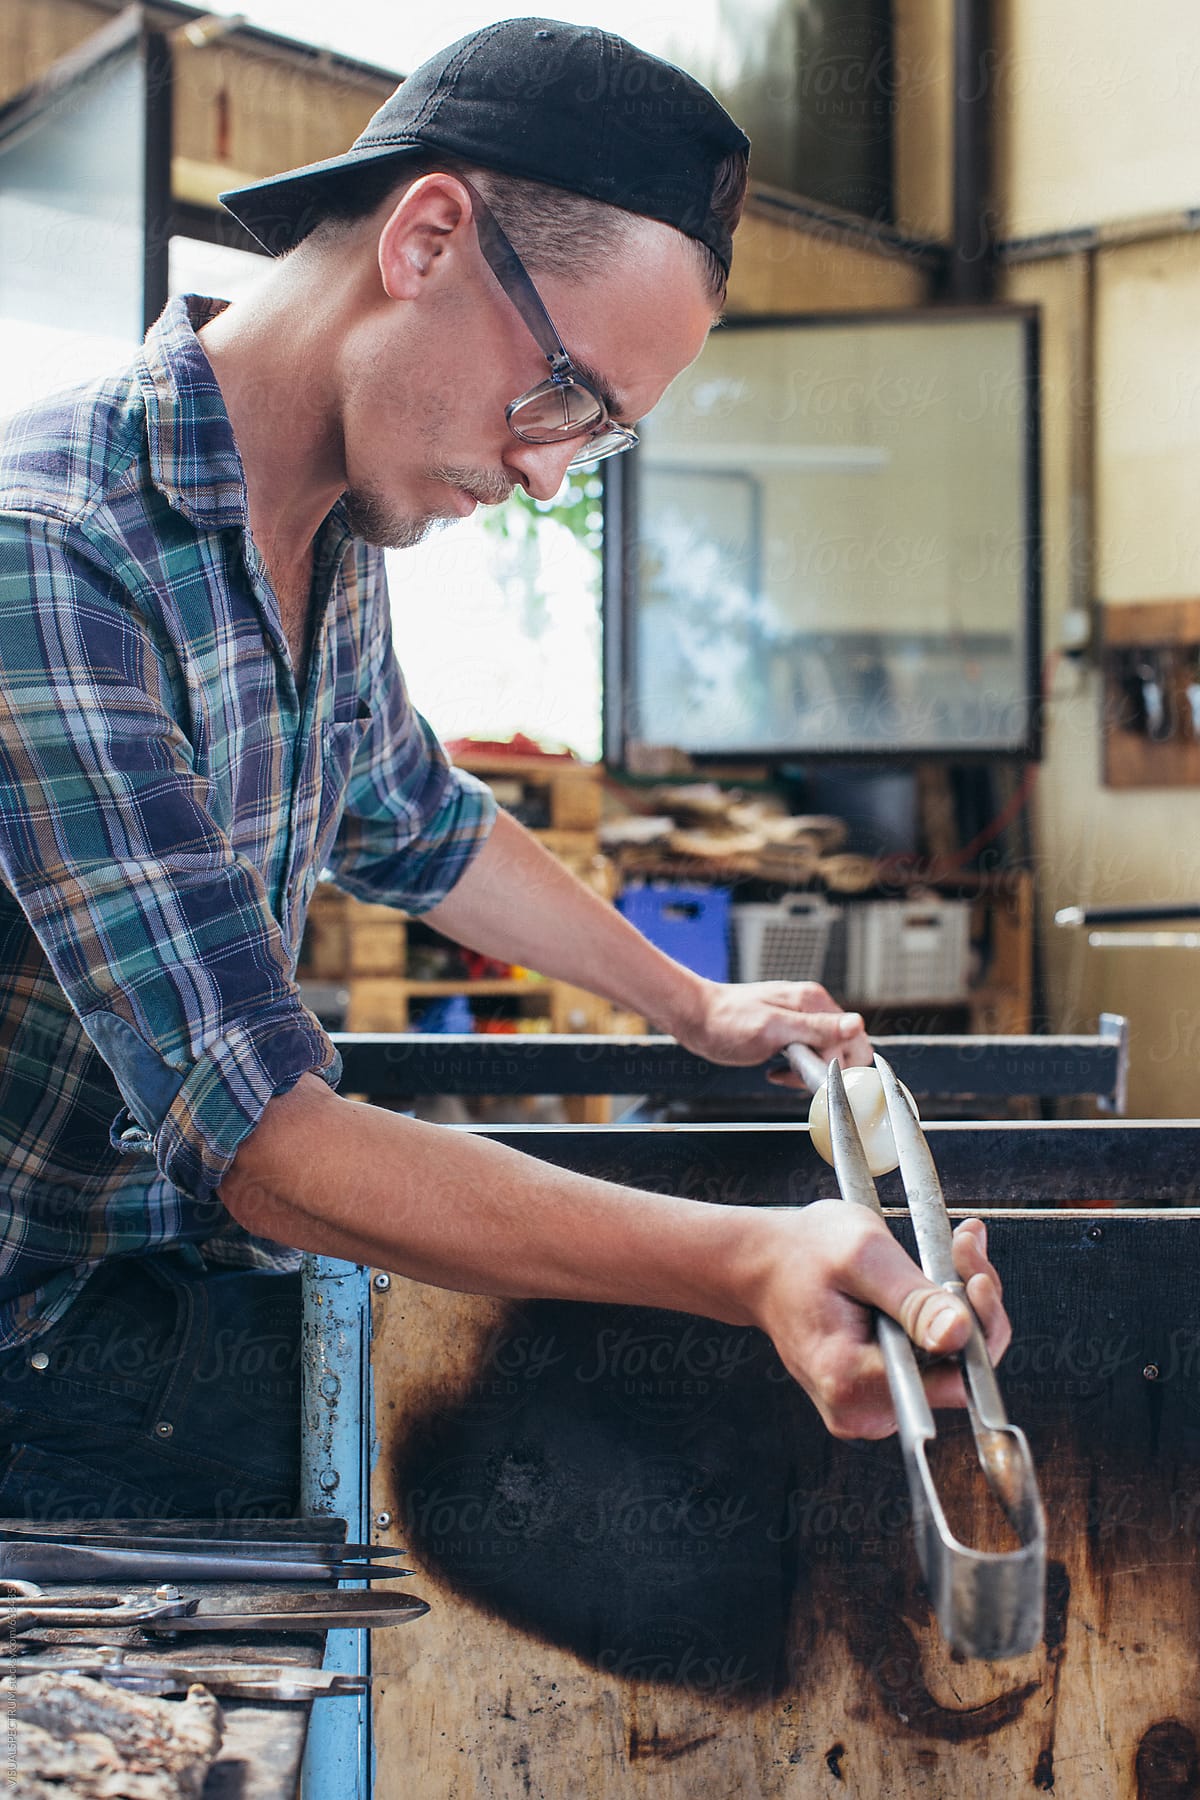 Artisan Glass Workshop - Male Hipster Artist Shaping Hot Glass With Pliers